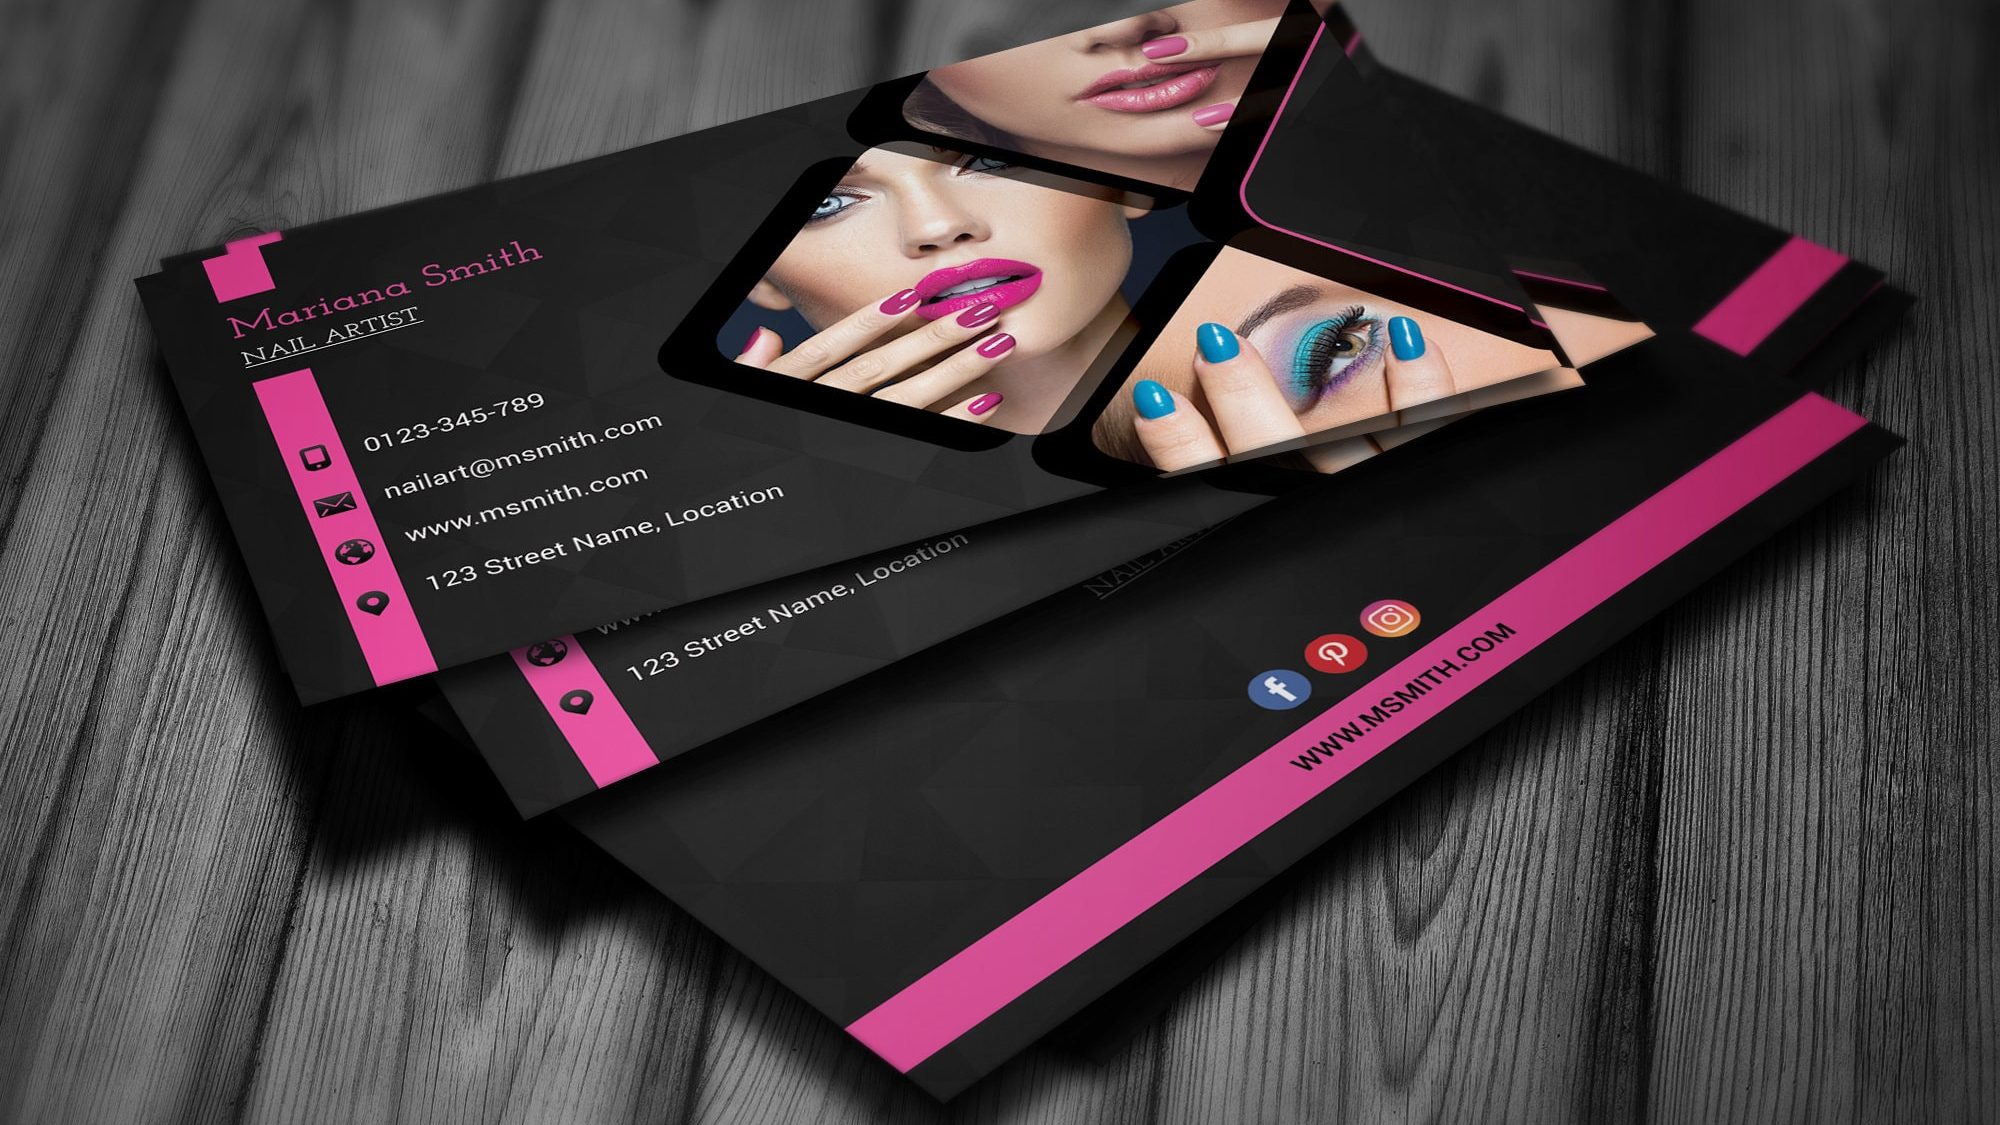 Neutral Gold | Hand Nail Salon Business Card Template | PosterMyWall